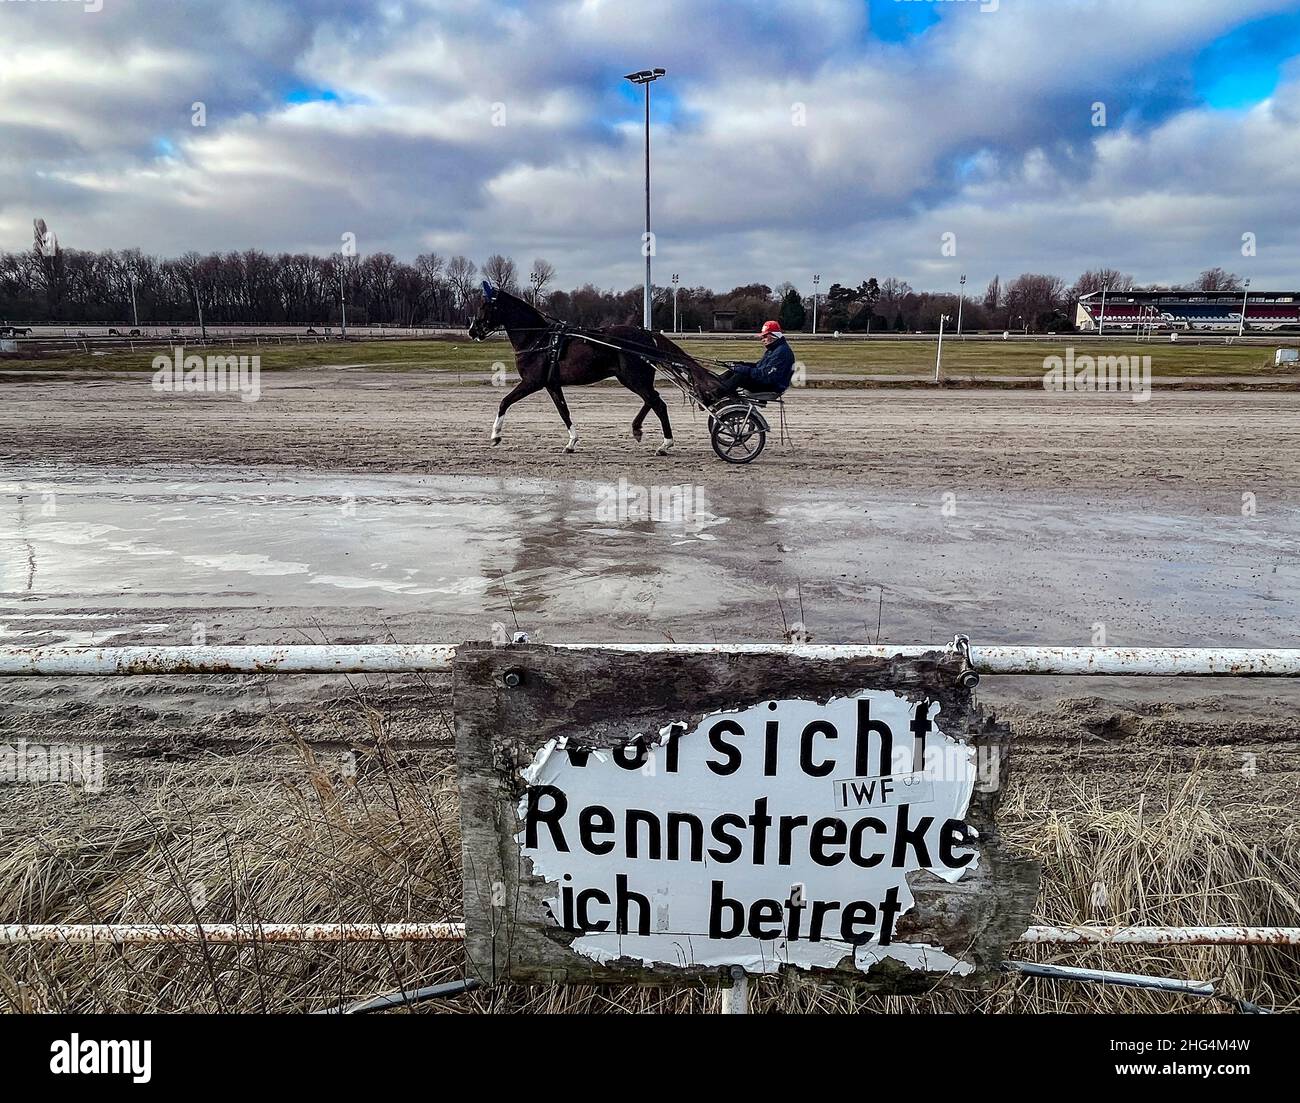 18 January 2022, Berlin: A trotter is on the move at the trotting track in Karlshorst. The area not only serves as a meeting place for horse lovers. Recreation-seekers also love the 30-hectare area for relaxing walks. The future of the trotting track is currently unclear. In 2020, an urban development concept for the future development of the site was presented. According to this concept, harness racing and equestrian sports are to be secured at the site and an additional sports area is to be created within the grounds. Multi-story residential buildings and 44,000 square meters of commercial s Stock Photo